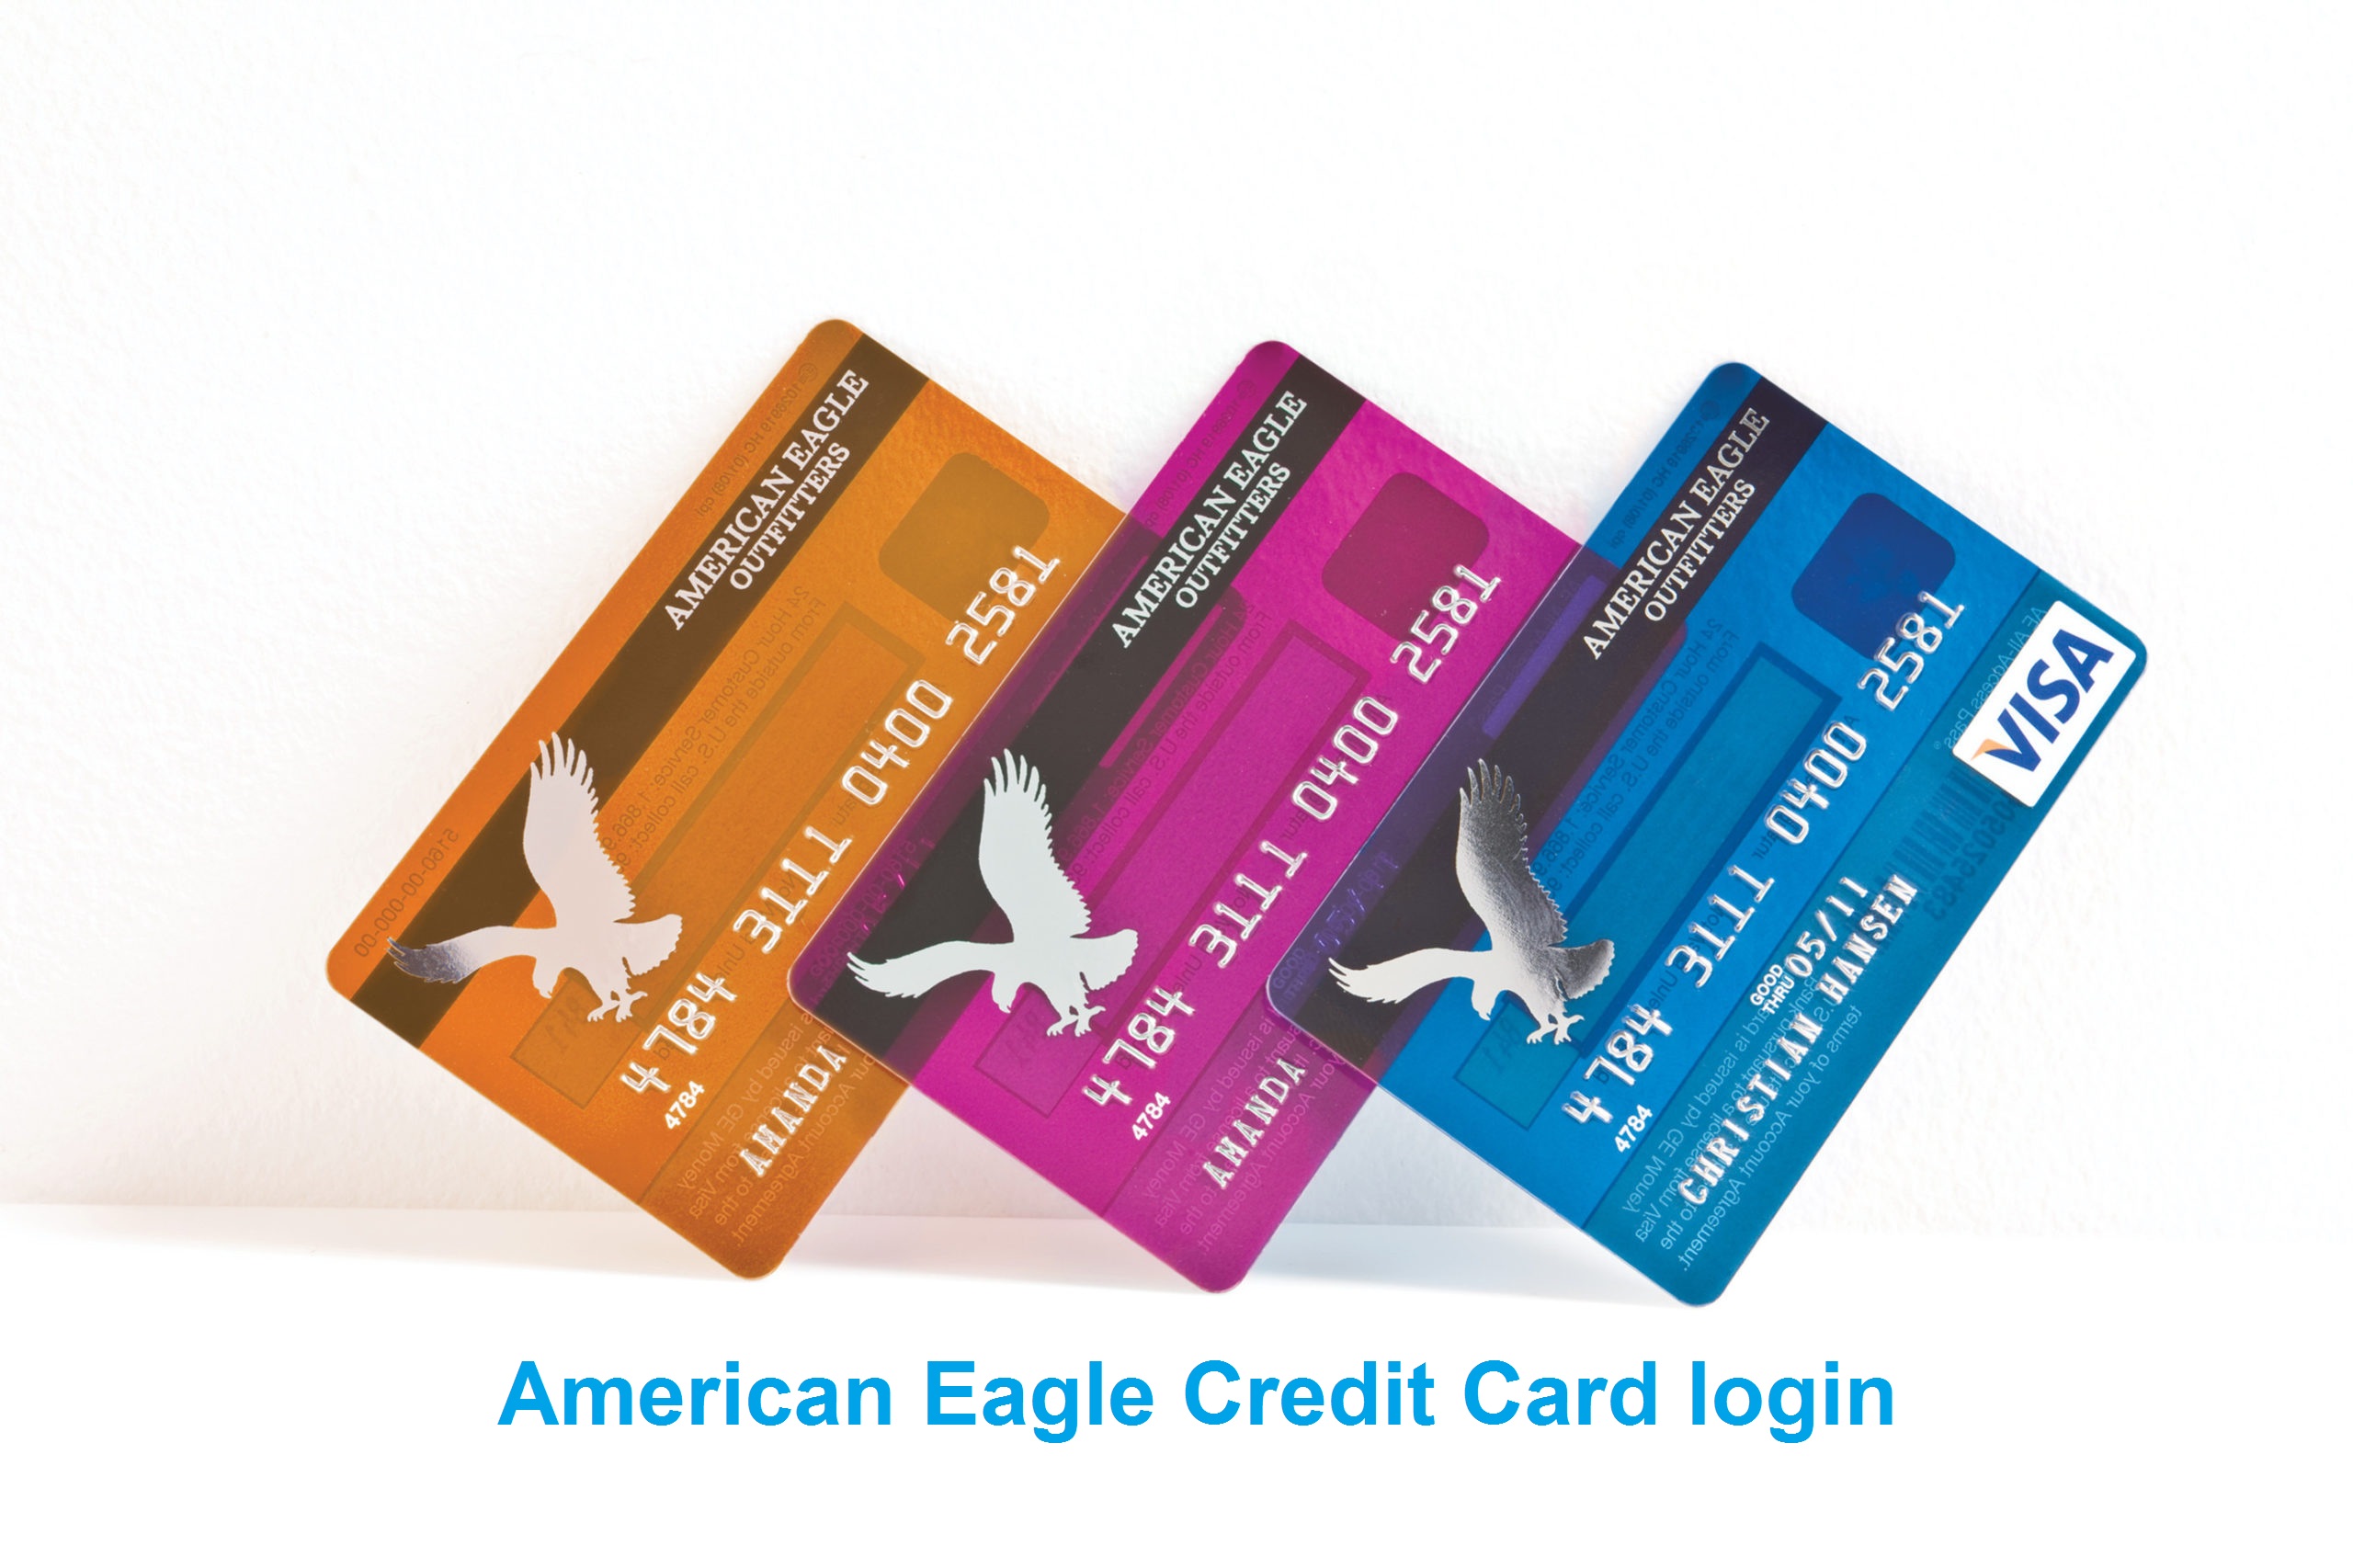 American Eagle Credit Card Login Process and how to apply?